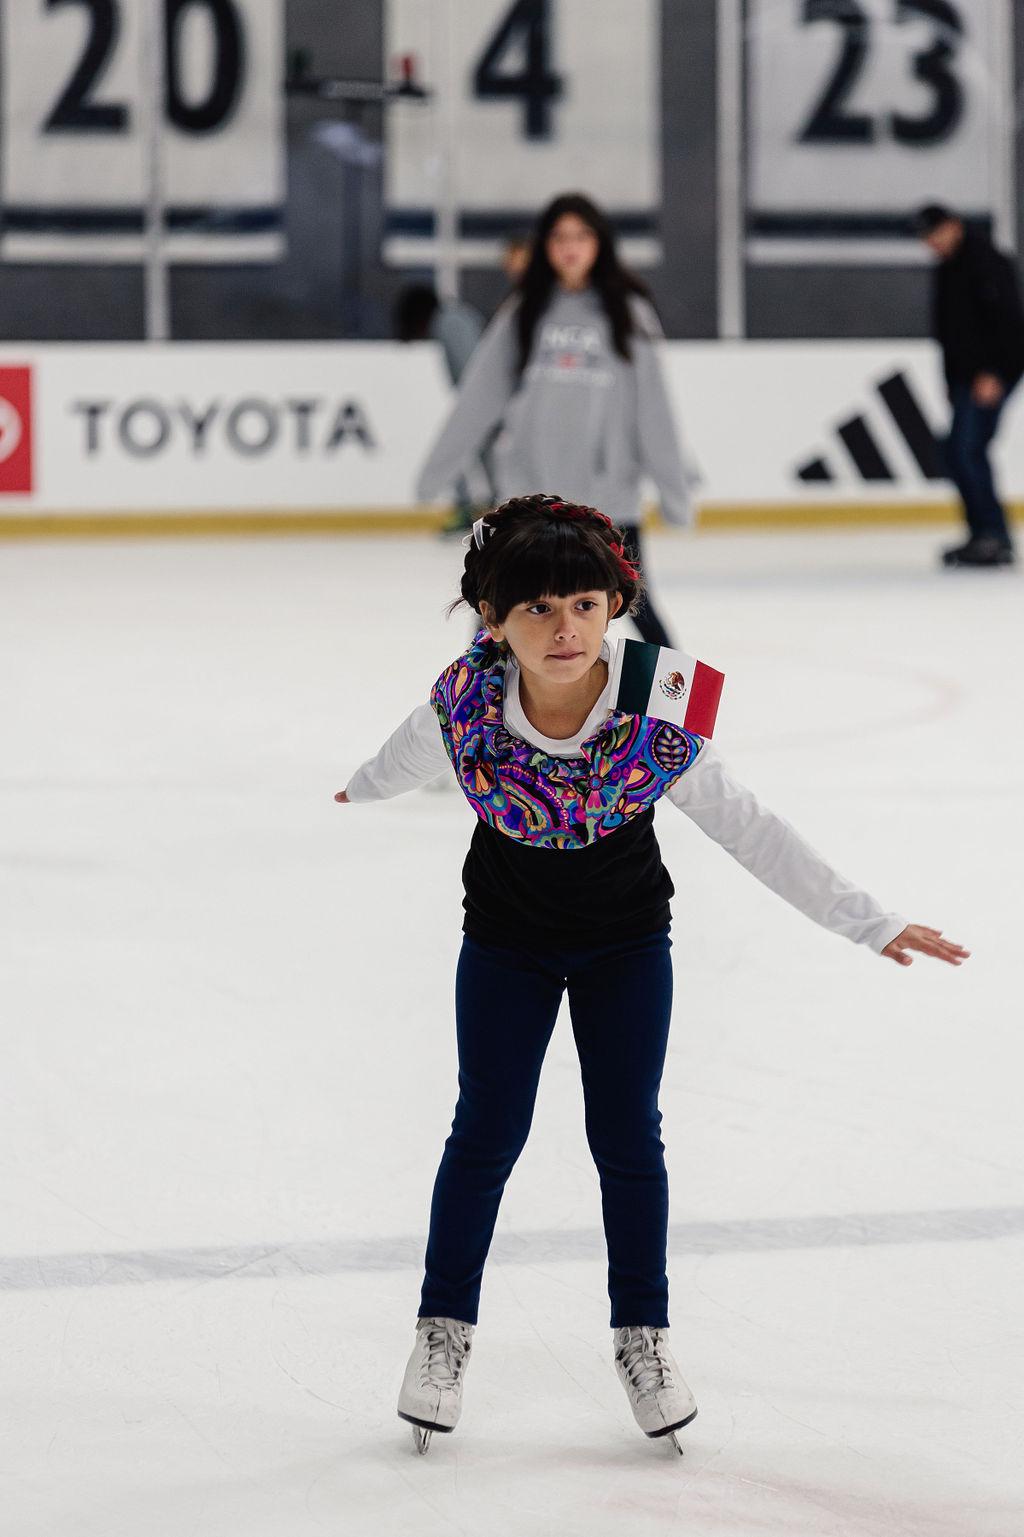 A young girl from 24 Degrees of Color skates on the ice in an outfit representing her heritage. Photo credit: Jason C Williams Photography